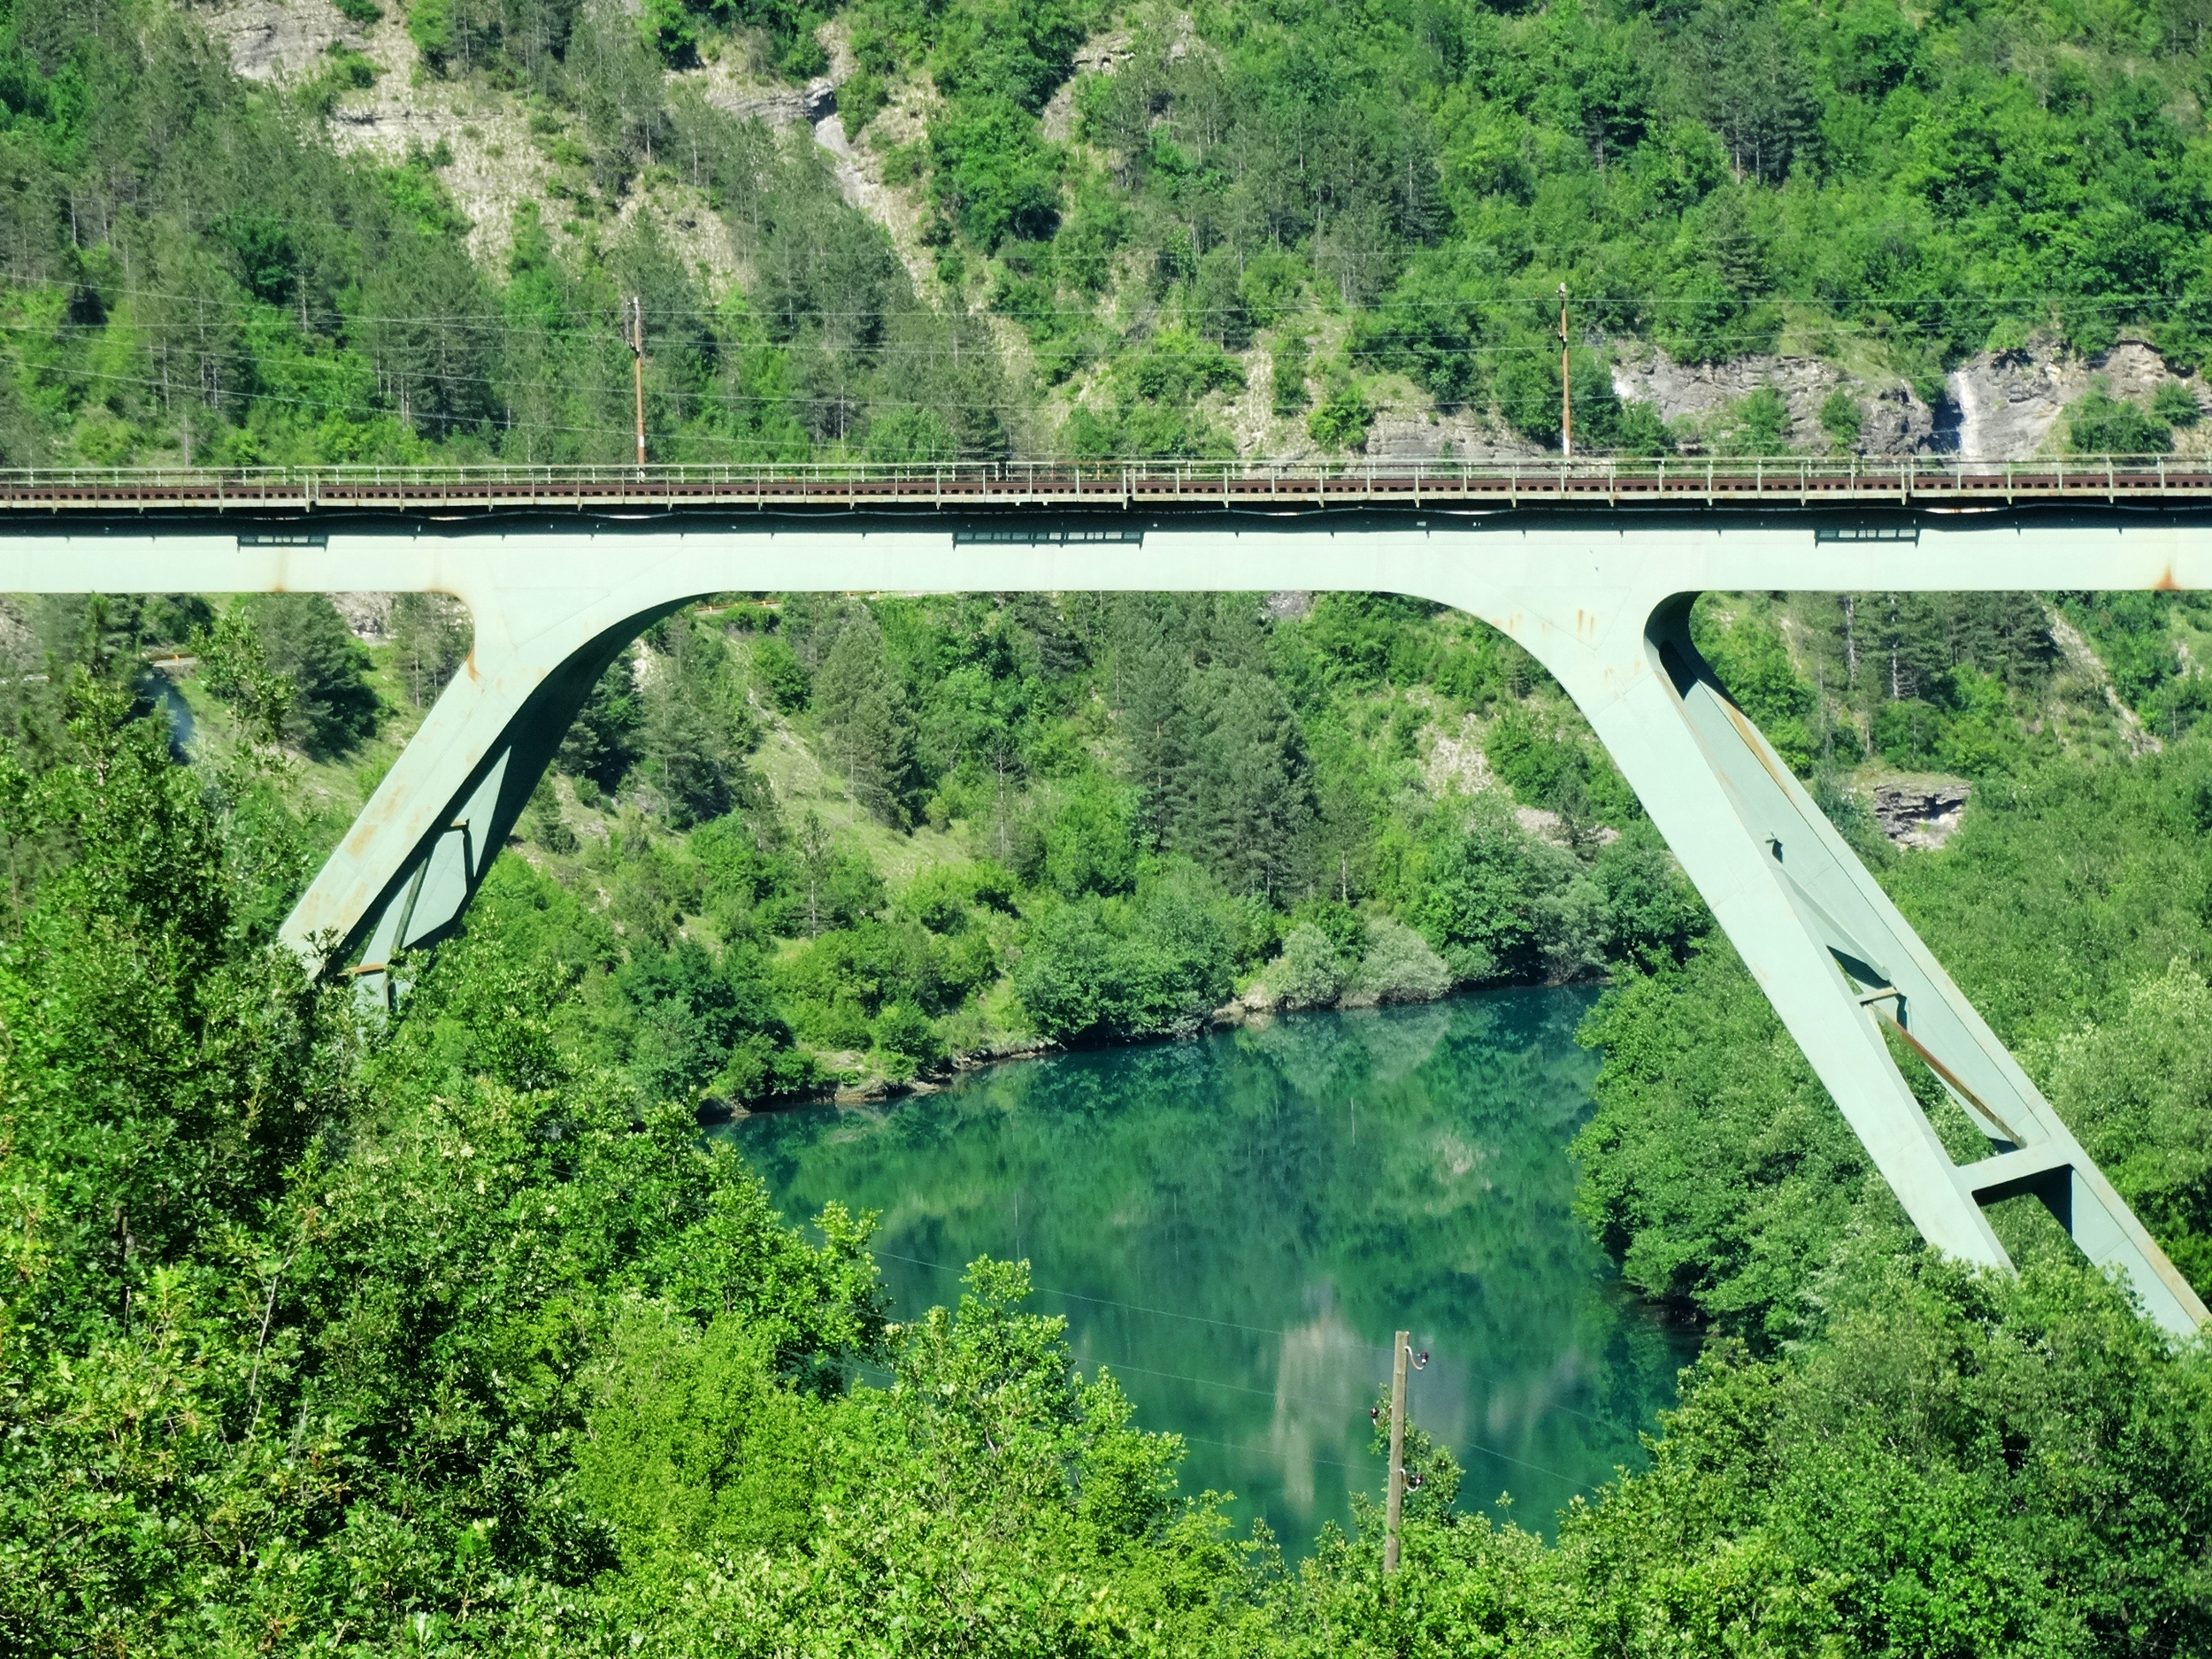 <p>The Balkans aren’t known to have an amazing rail system. However, one train ride that is a must on any visit to the area is the two-hour journey between Sarajevo and Mostar in Bosnia & Herzegovina. Travel through the <span>Dinaric Alps and catch sights of elevated bridges, waterfalls, and peaks that would otherwise be hard to reach.</span></p><p><a href='https://www.msn.com/en-us/community/channel/vid-cj9pqbr0vn9in2b6ddcd8sfgpfq6x6utp44fssrv6mc2gtybw0us'>Follow us on MSN to see more of our exclusive lifestyle content.</a></p>